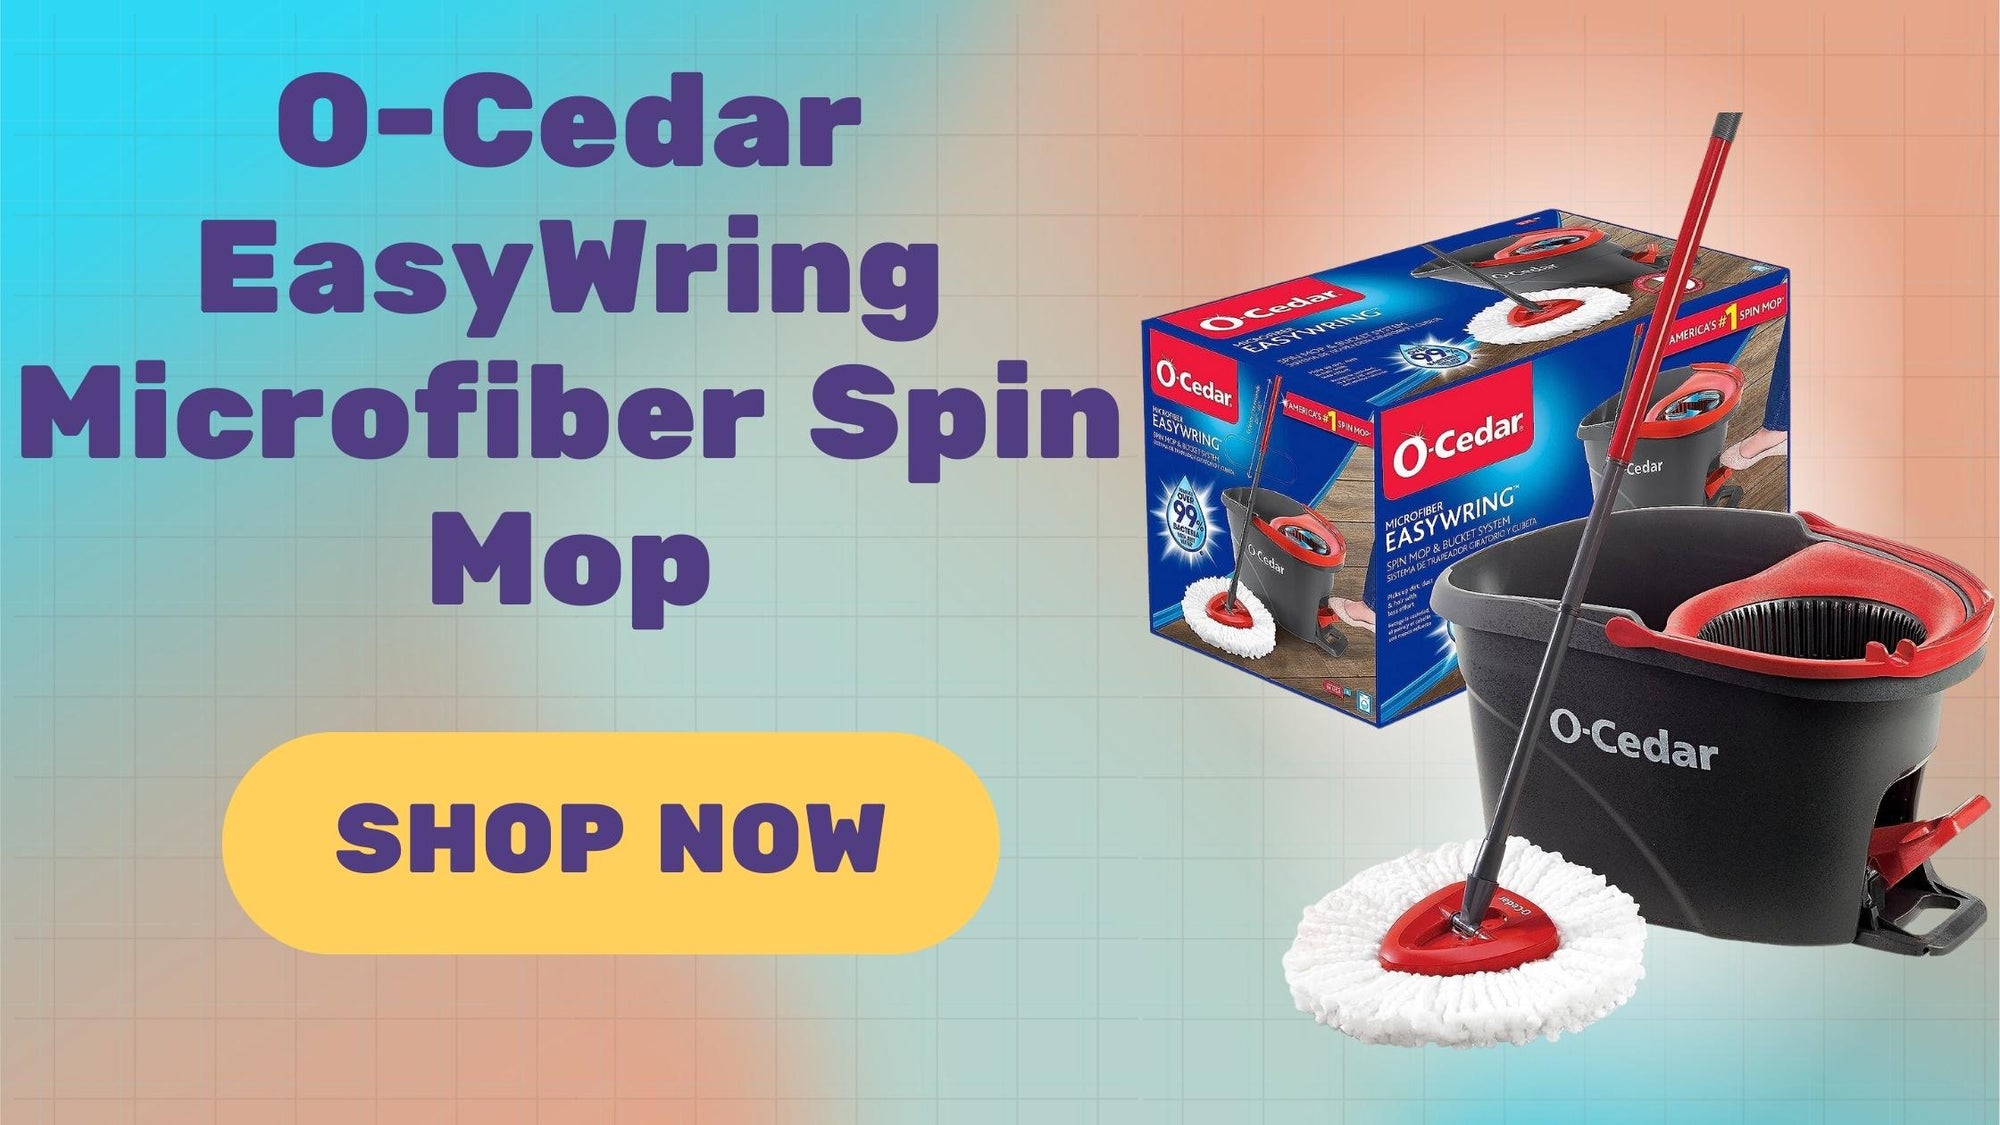 Effortless Cleaning with the O-Cedar EasyWring Microfiber Spin Mop